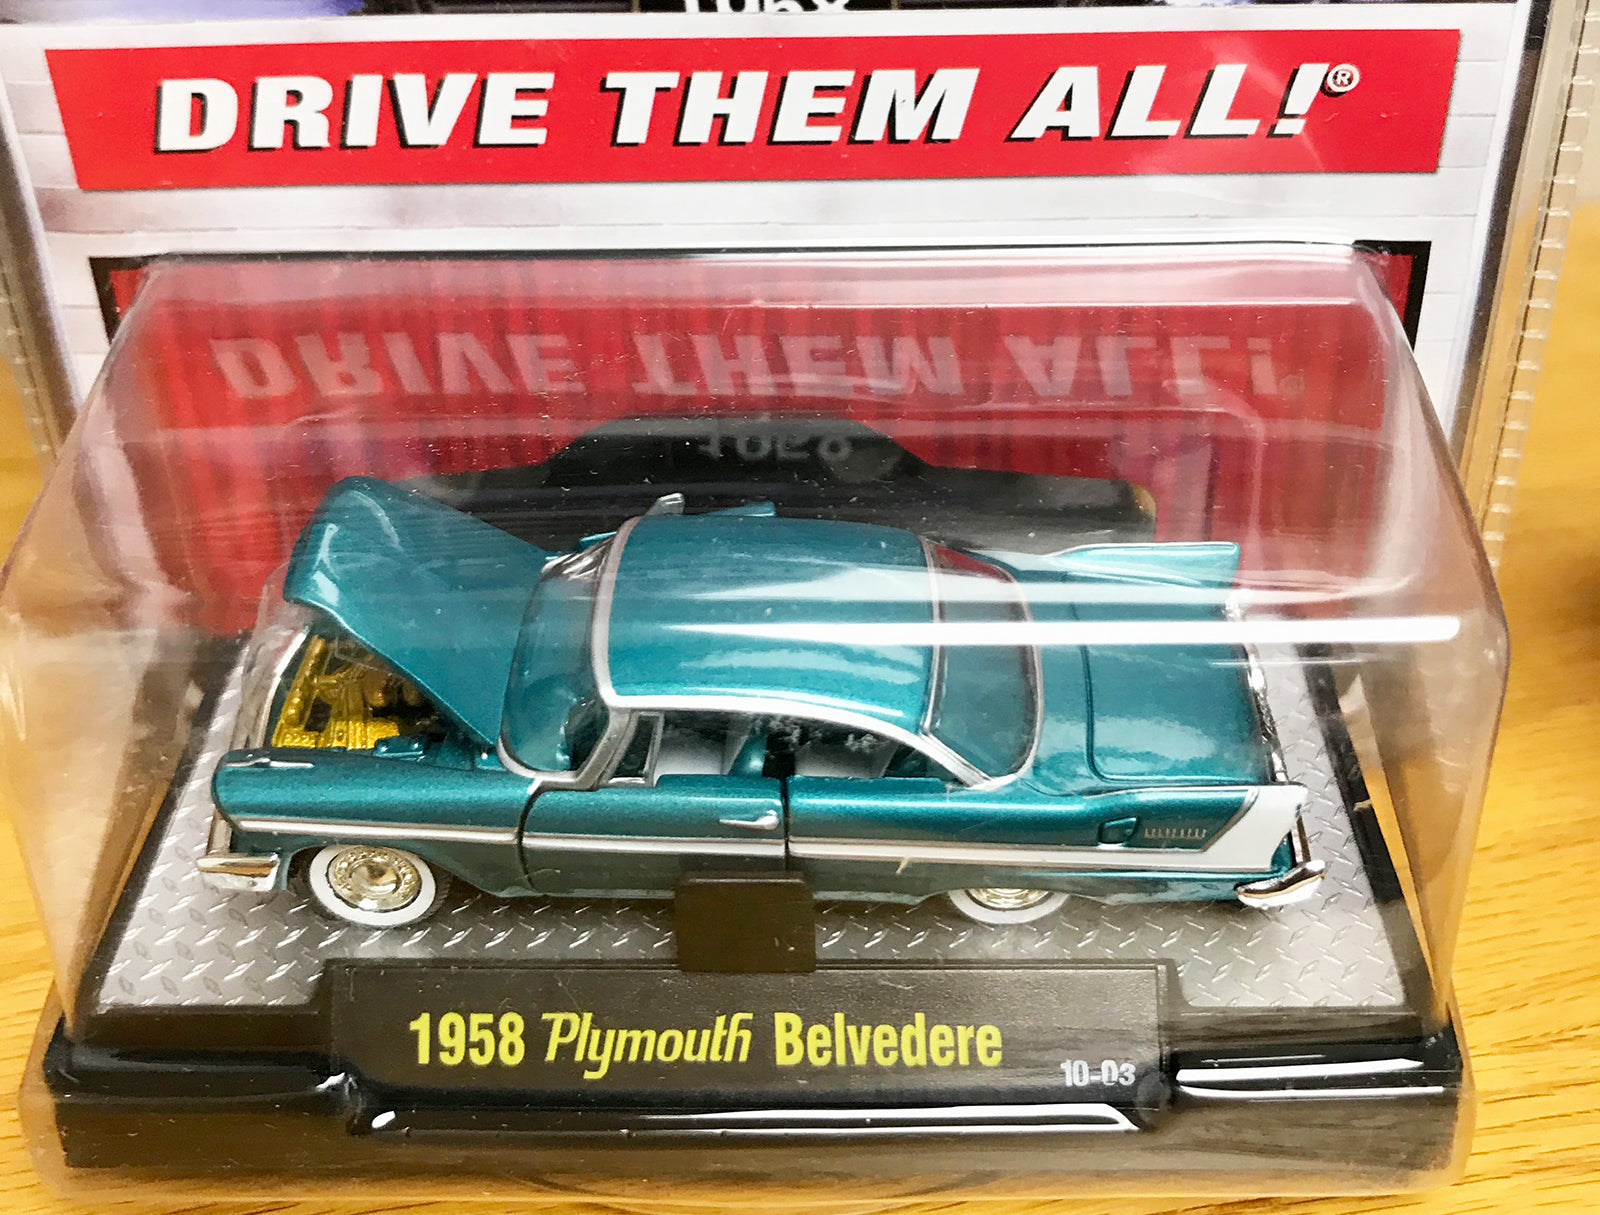 S 1958 Plymouth Belvedere - Blue green